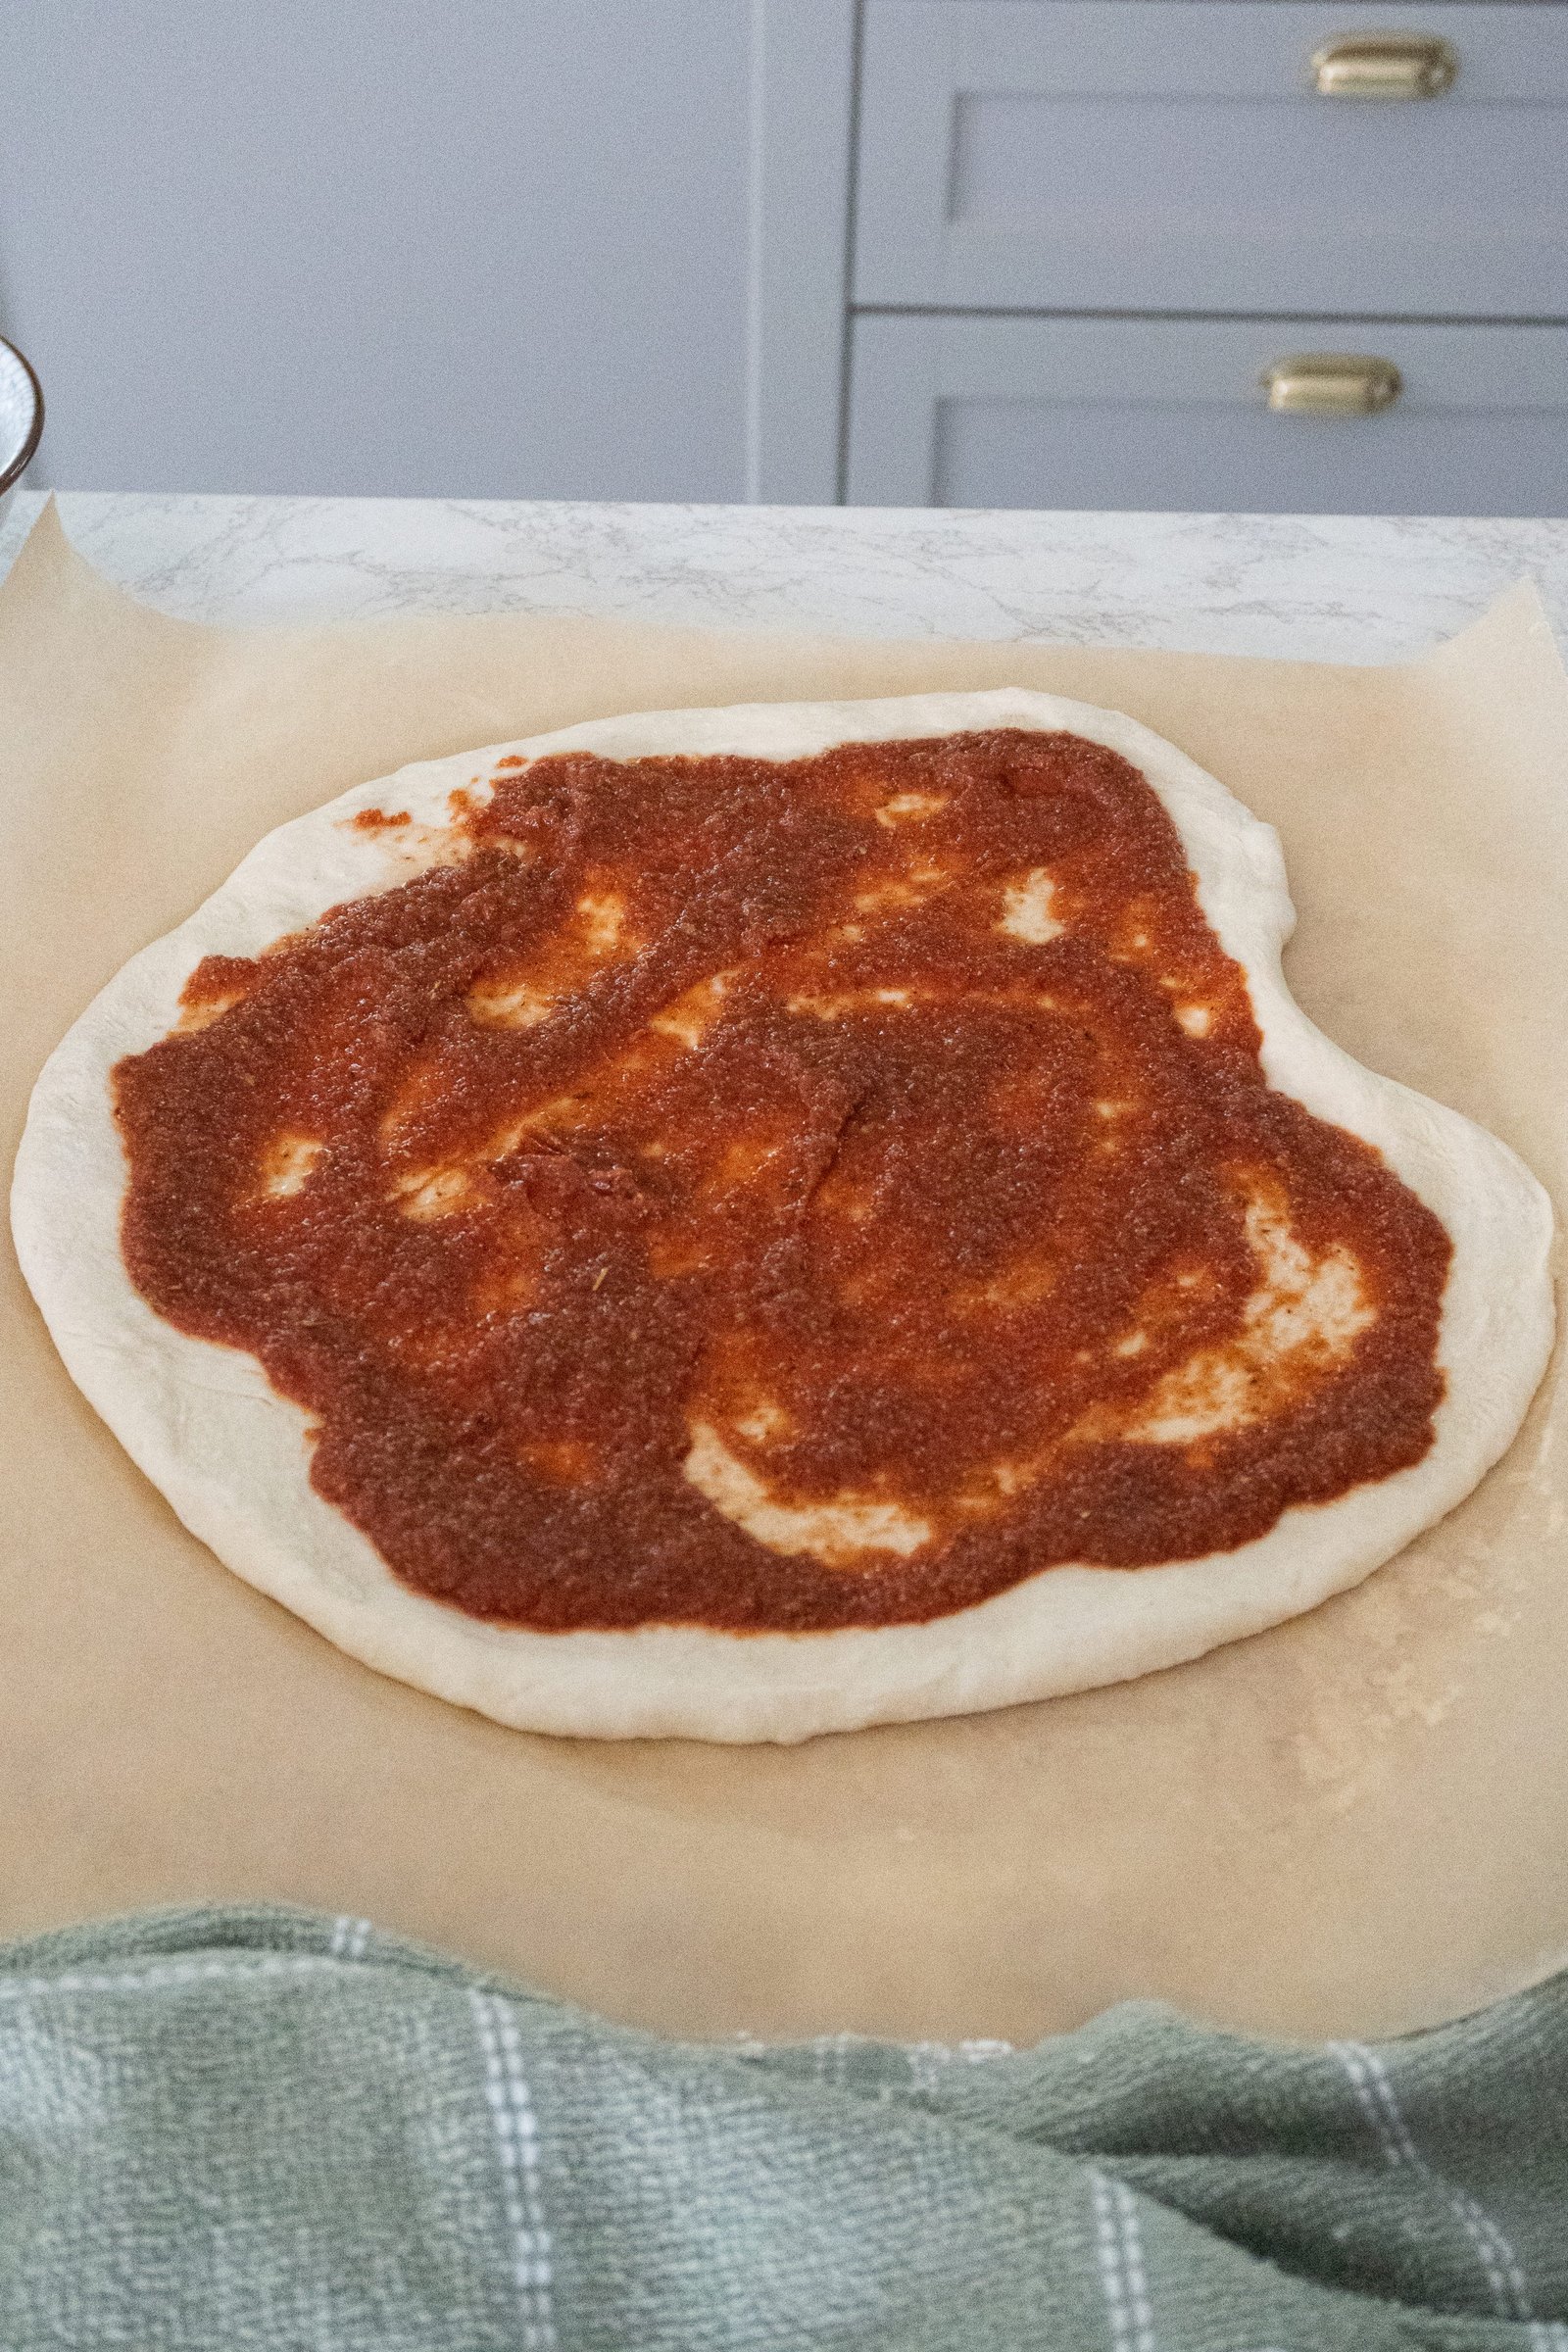 A ball of homemade Italian pizza dough with sauce spread evenly on top, ready to be baked into a delicious, hot, and cheesy pizza.
